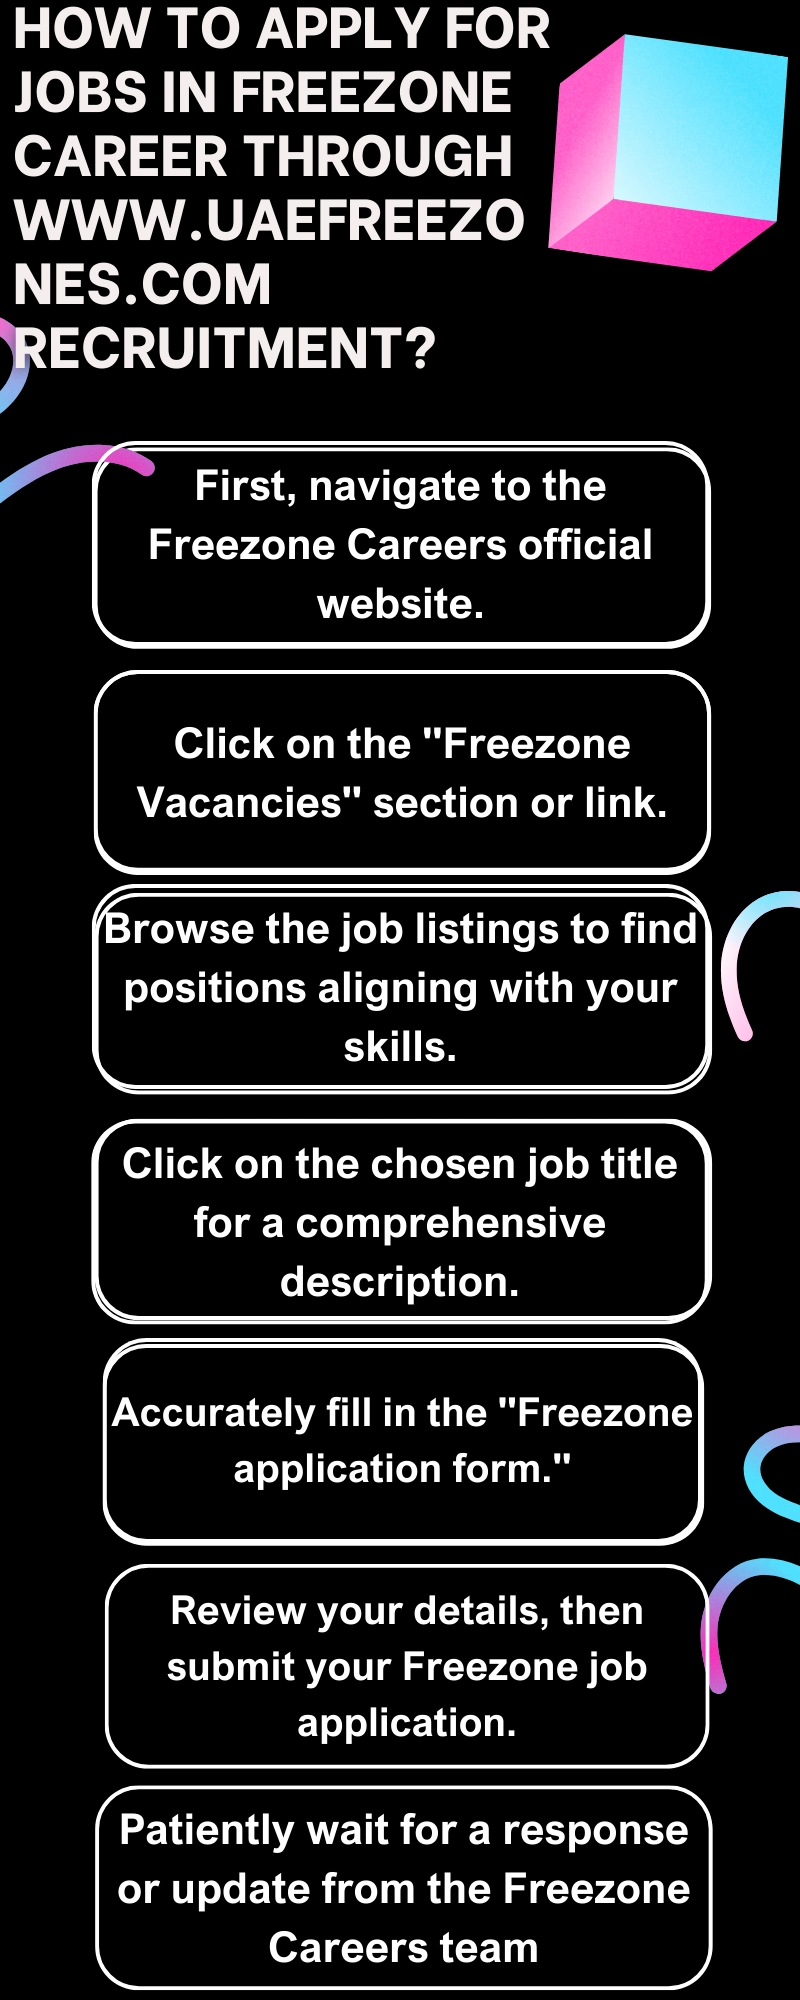 How to Apply for Jobs in Freezone Career through www.uaefreezones.com recruitment?